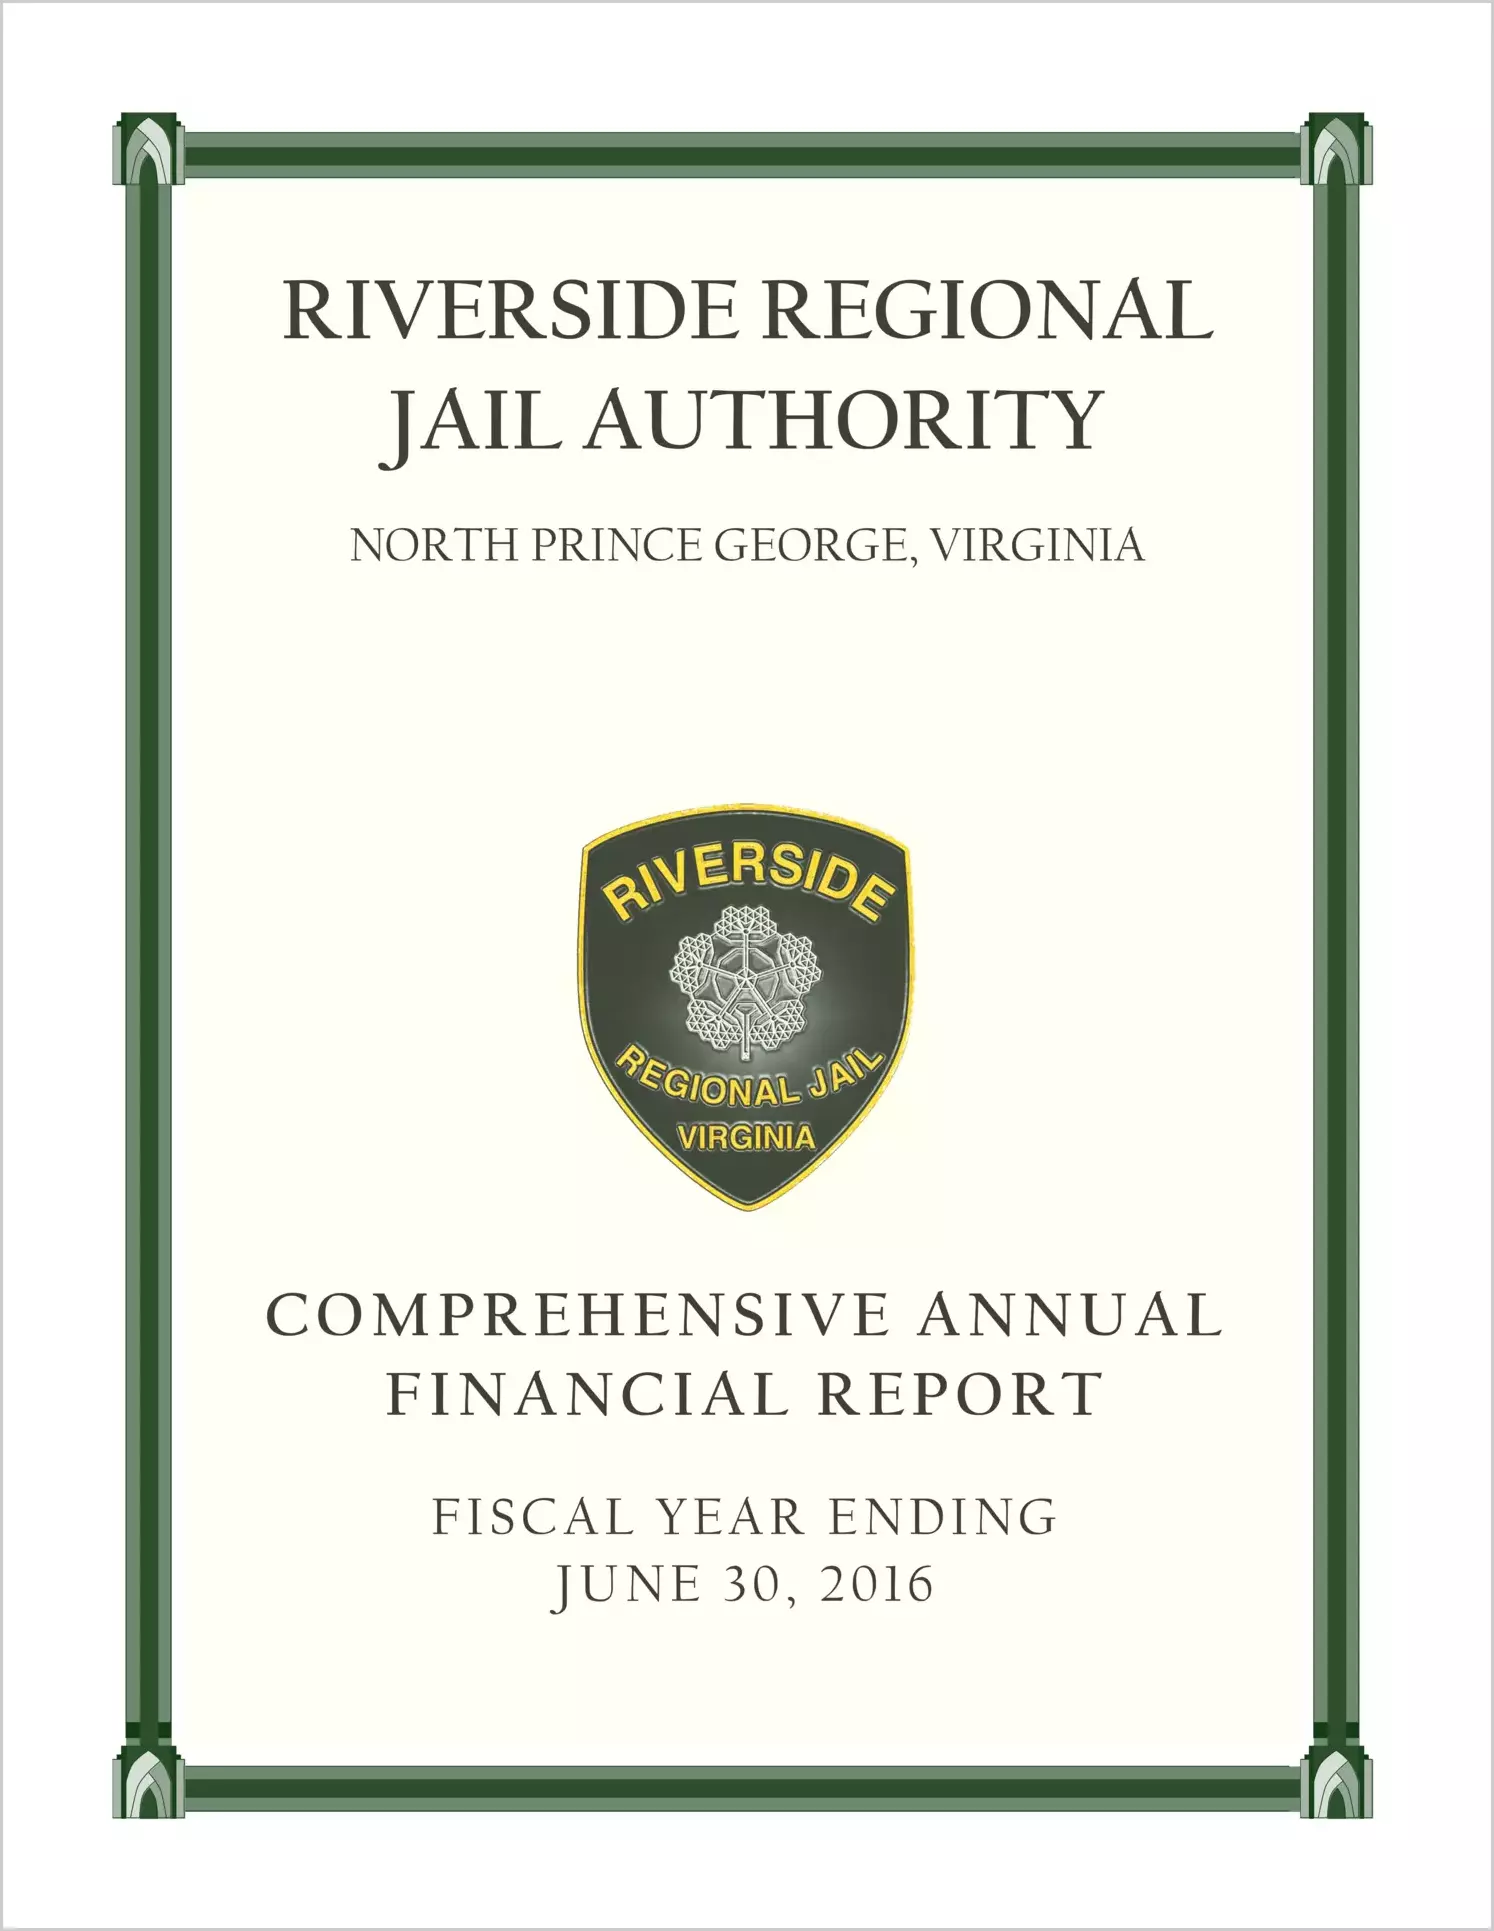 2016 ABC/Other Annual Financial Report  for Riverside Regional Jail Authority